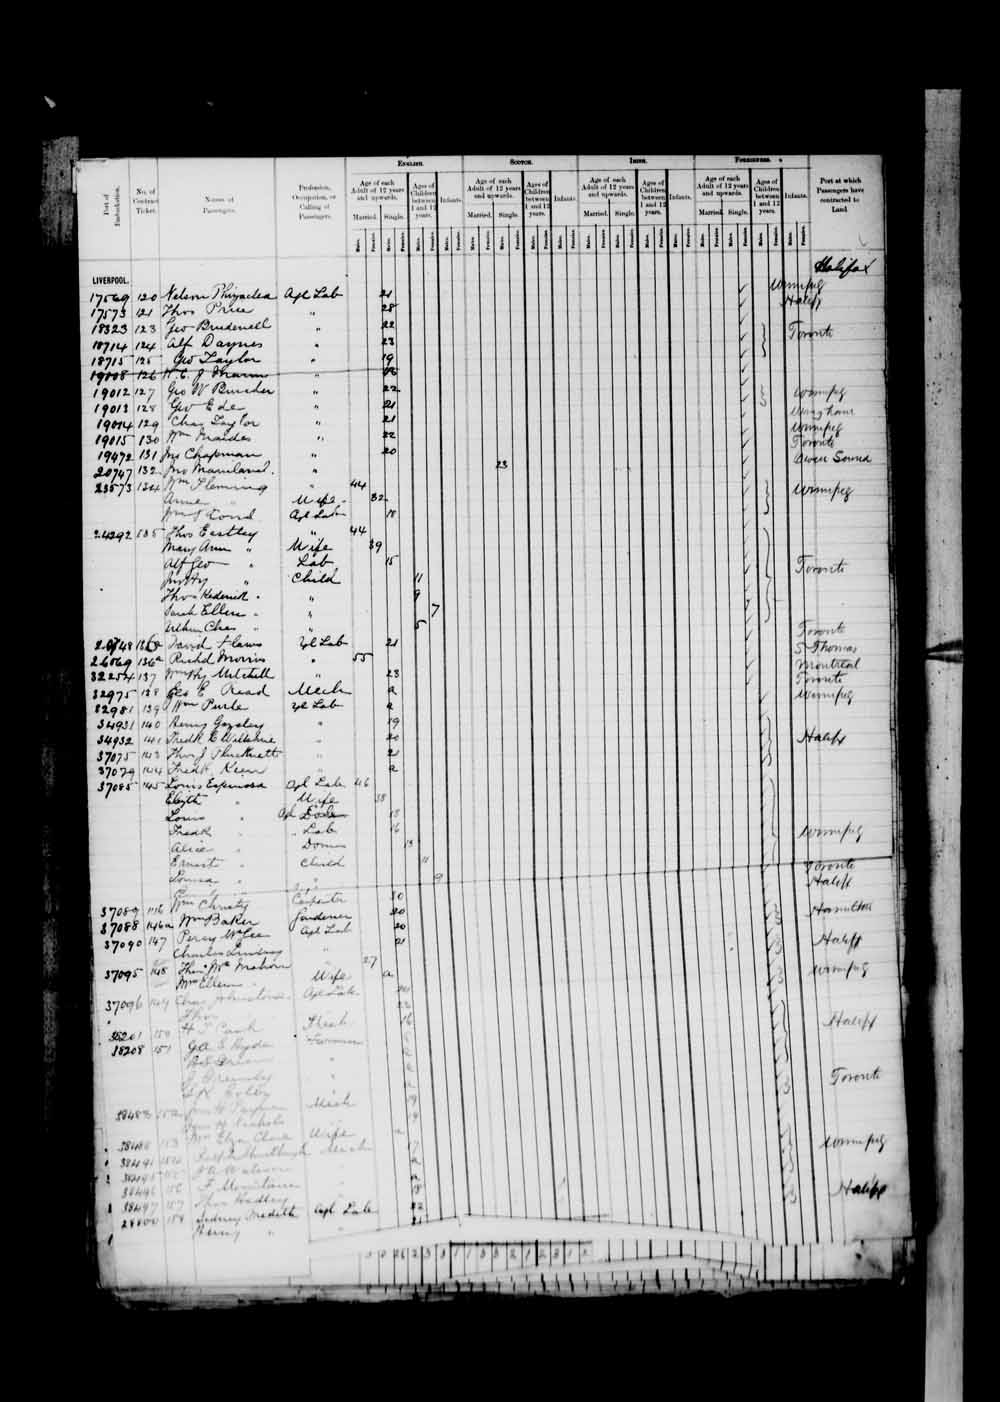 Digitized page of Passenger Lists for Image No.: e003674944